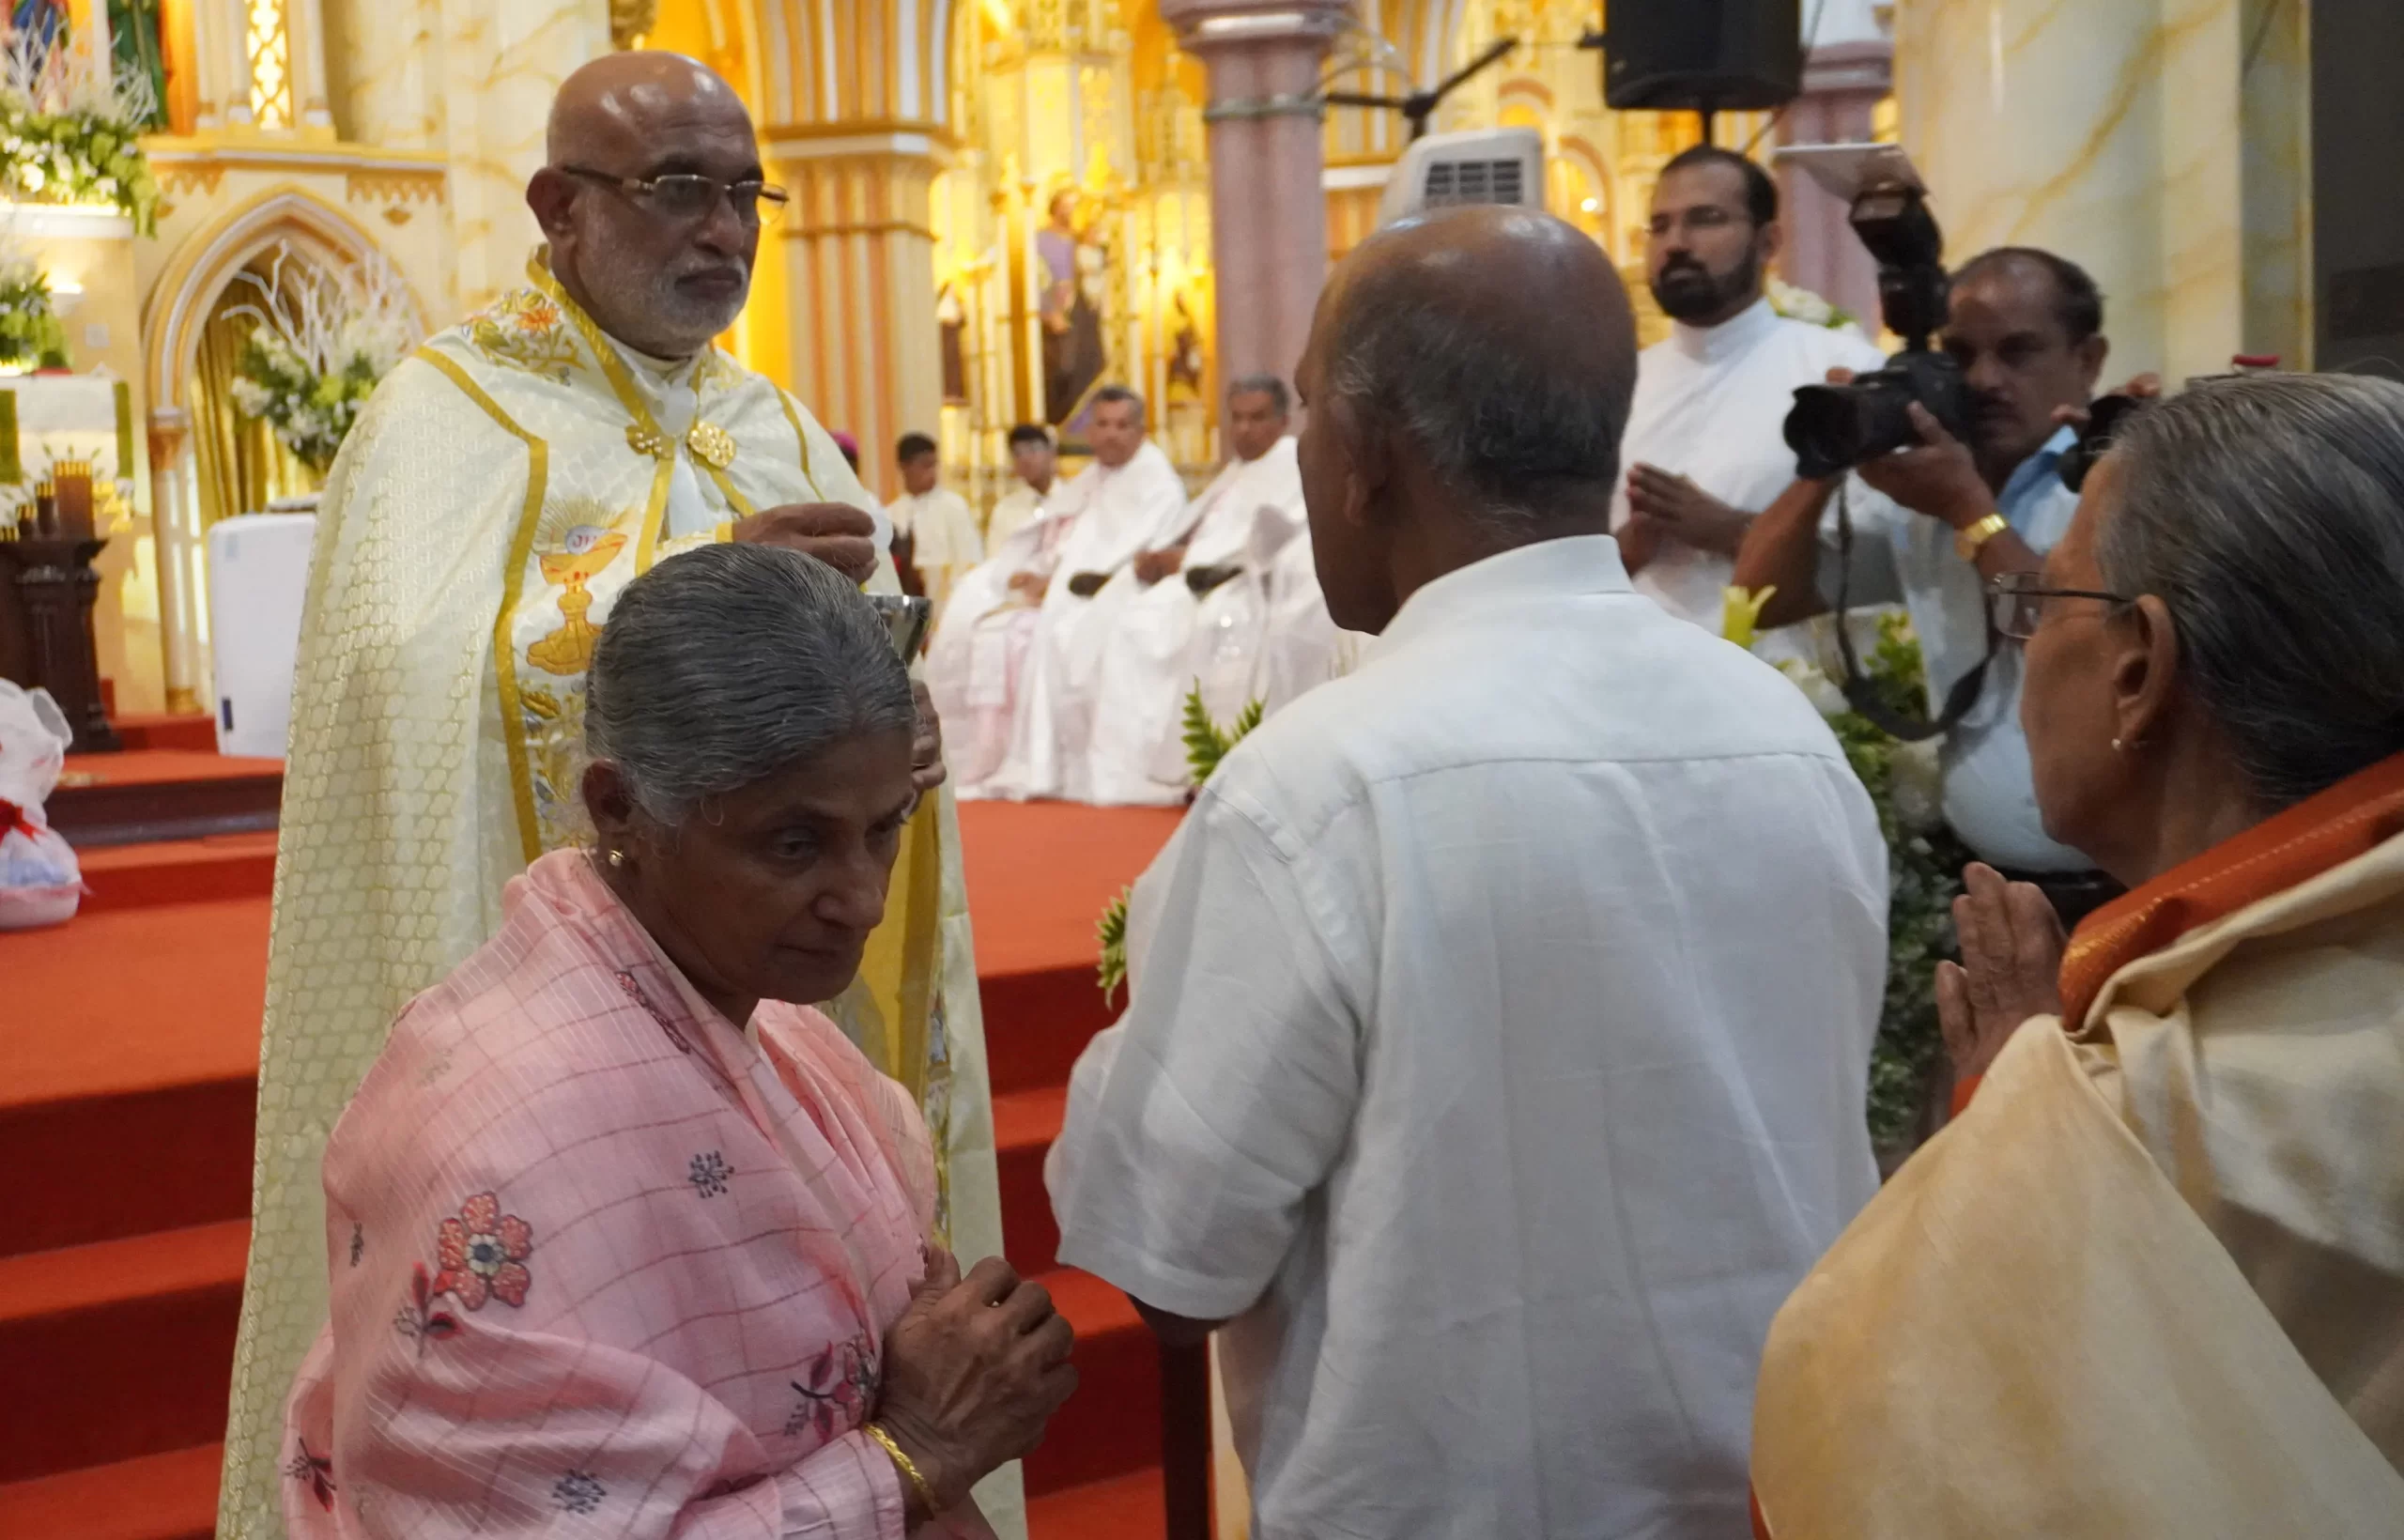 Major Archbishop Raphael Thattil’s elder brothers and sisters (he is the youngest of 10 children) took part in the Jan. 14, 2024, solemn Mass and received Communion from him. Credit: Anto Akkara